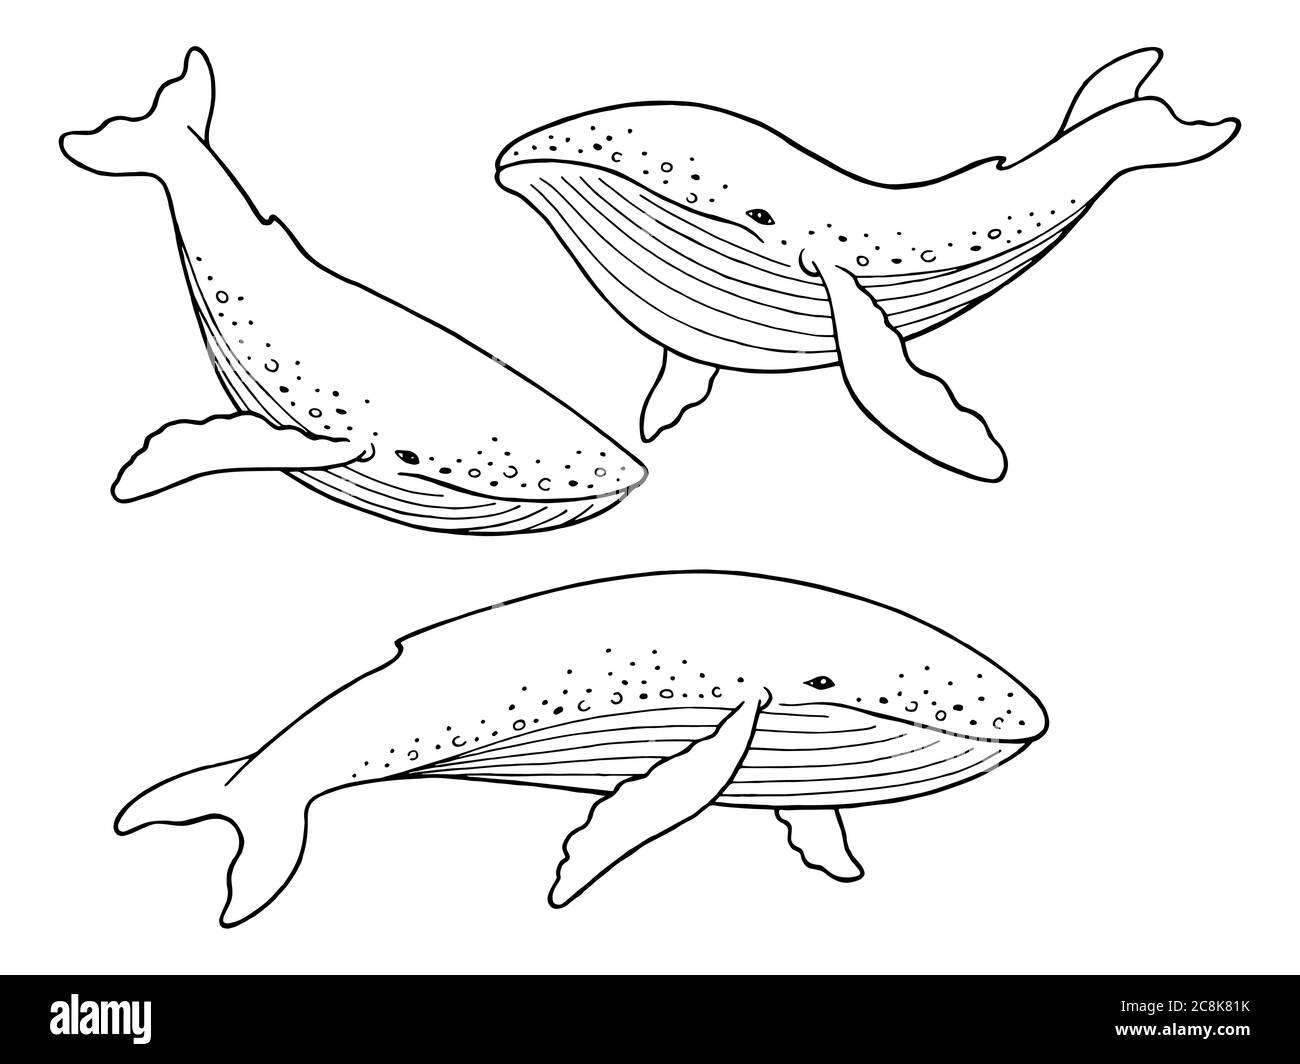 Cartoon whale Black and White Stock Photos & Images - Alamy